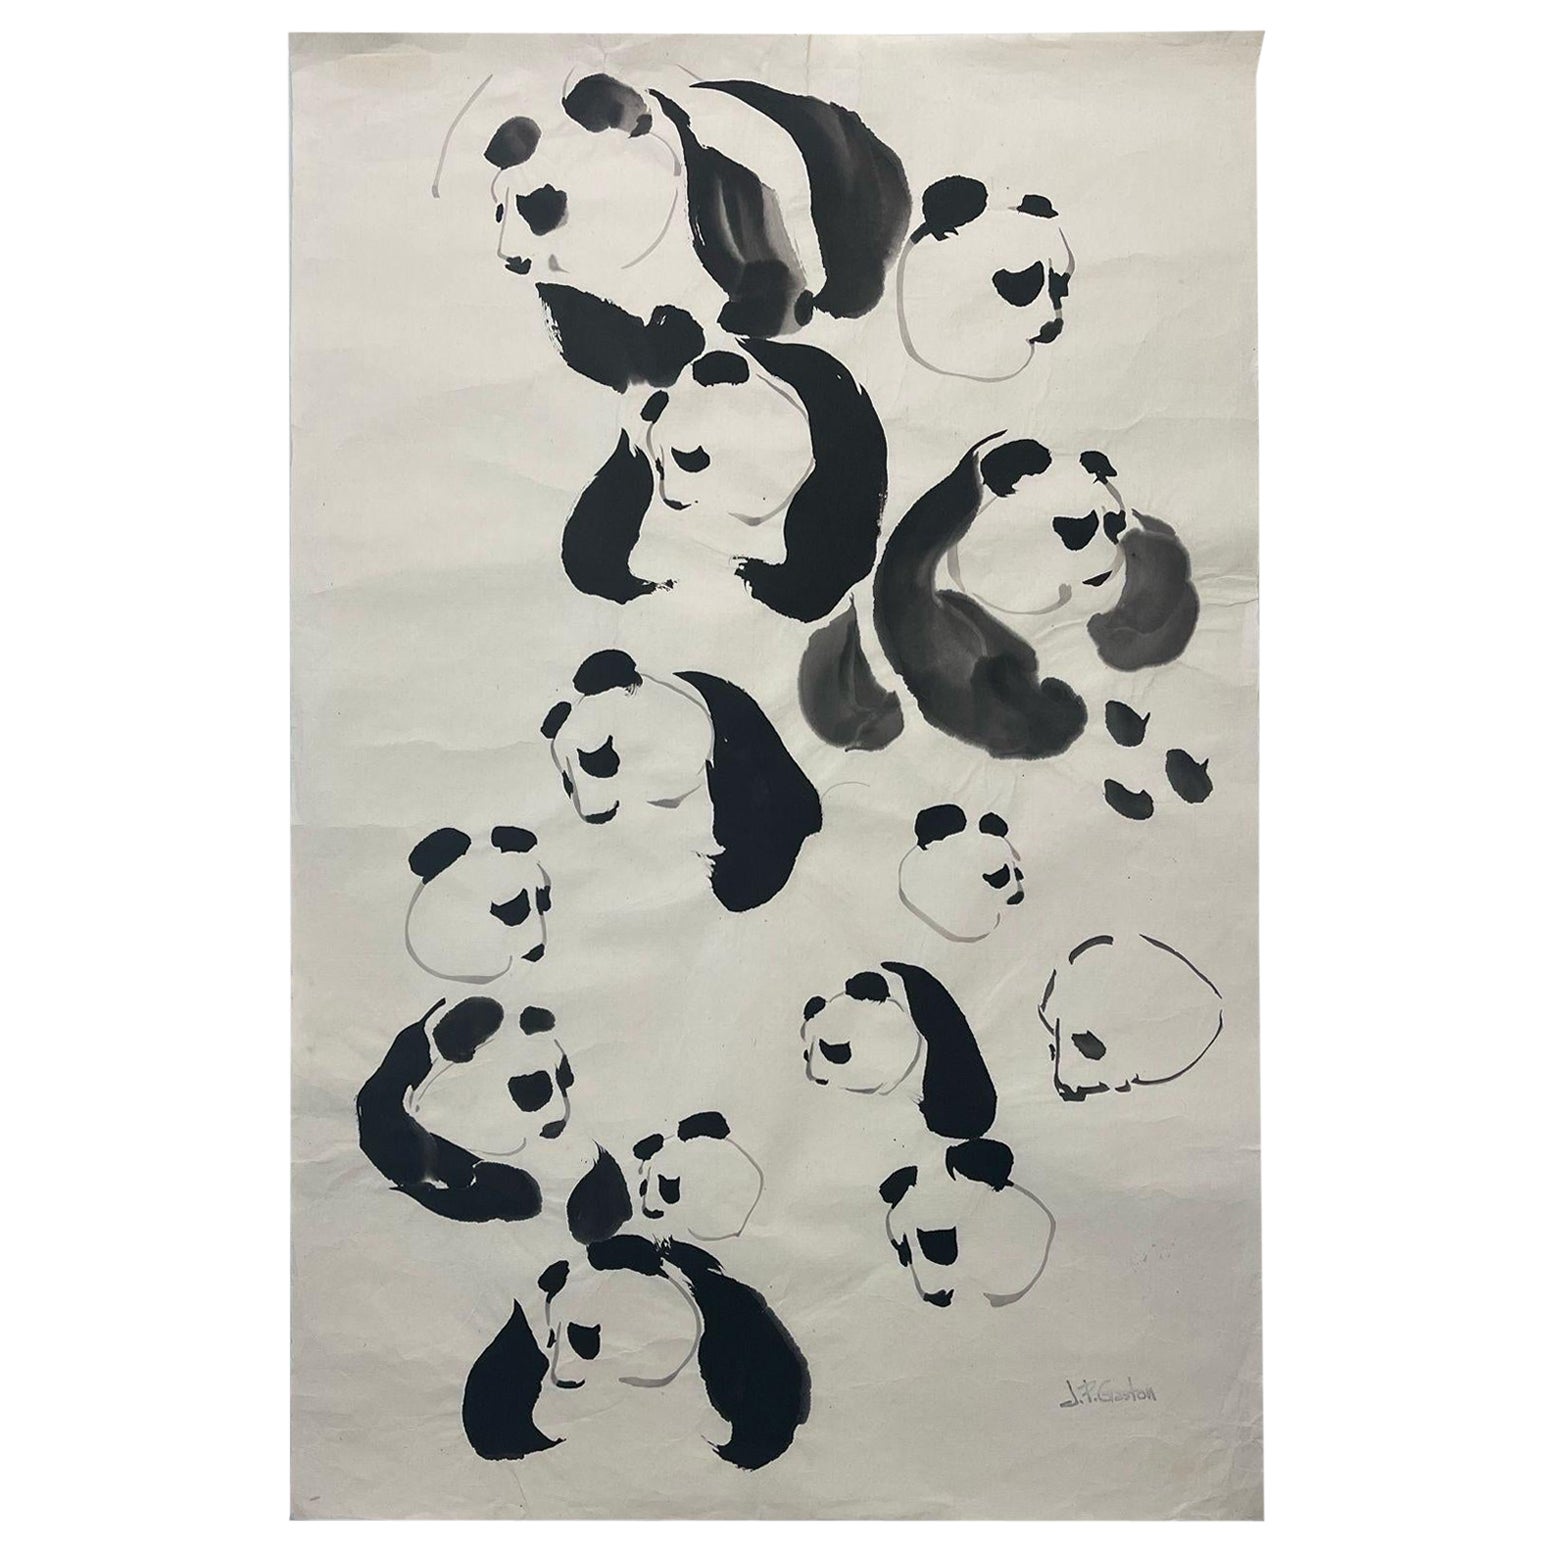 Vintage Signed Original Watercolor Painting of Panda Bear Study. For Sale